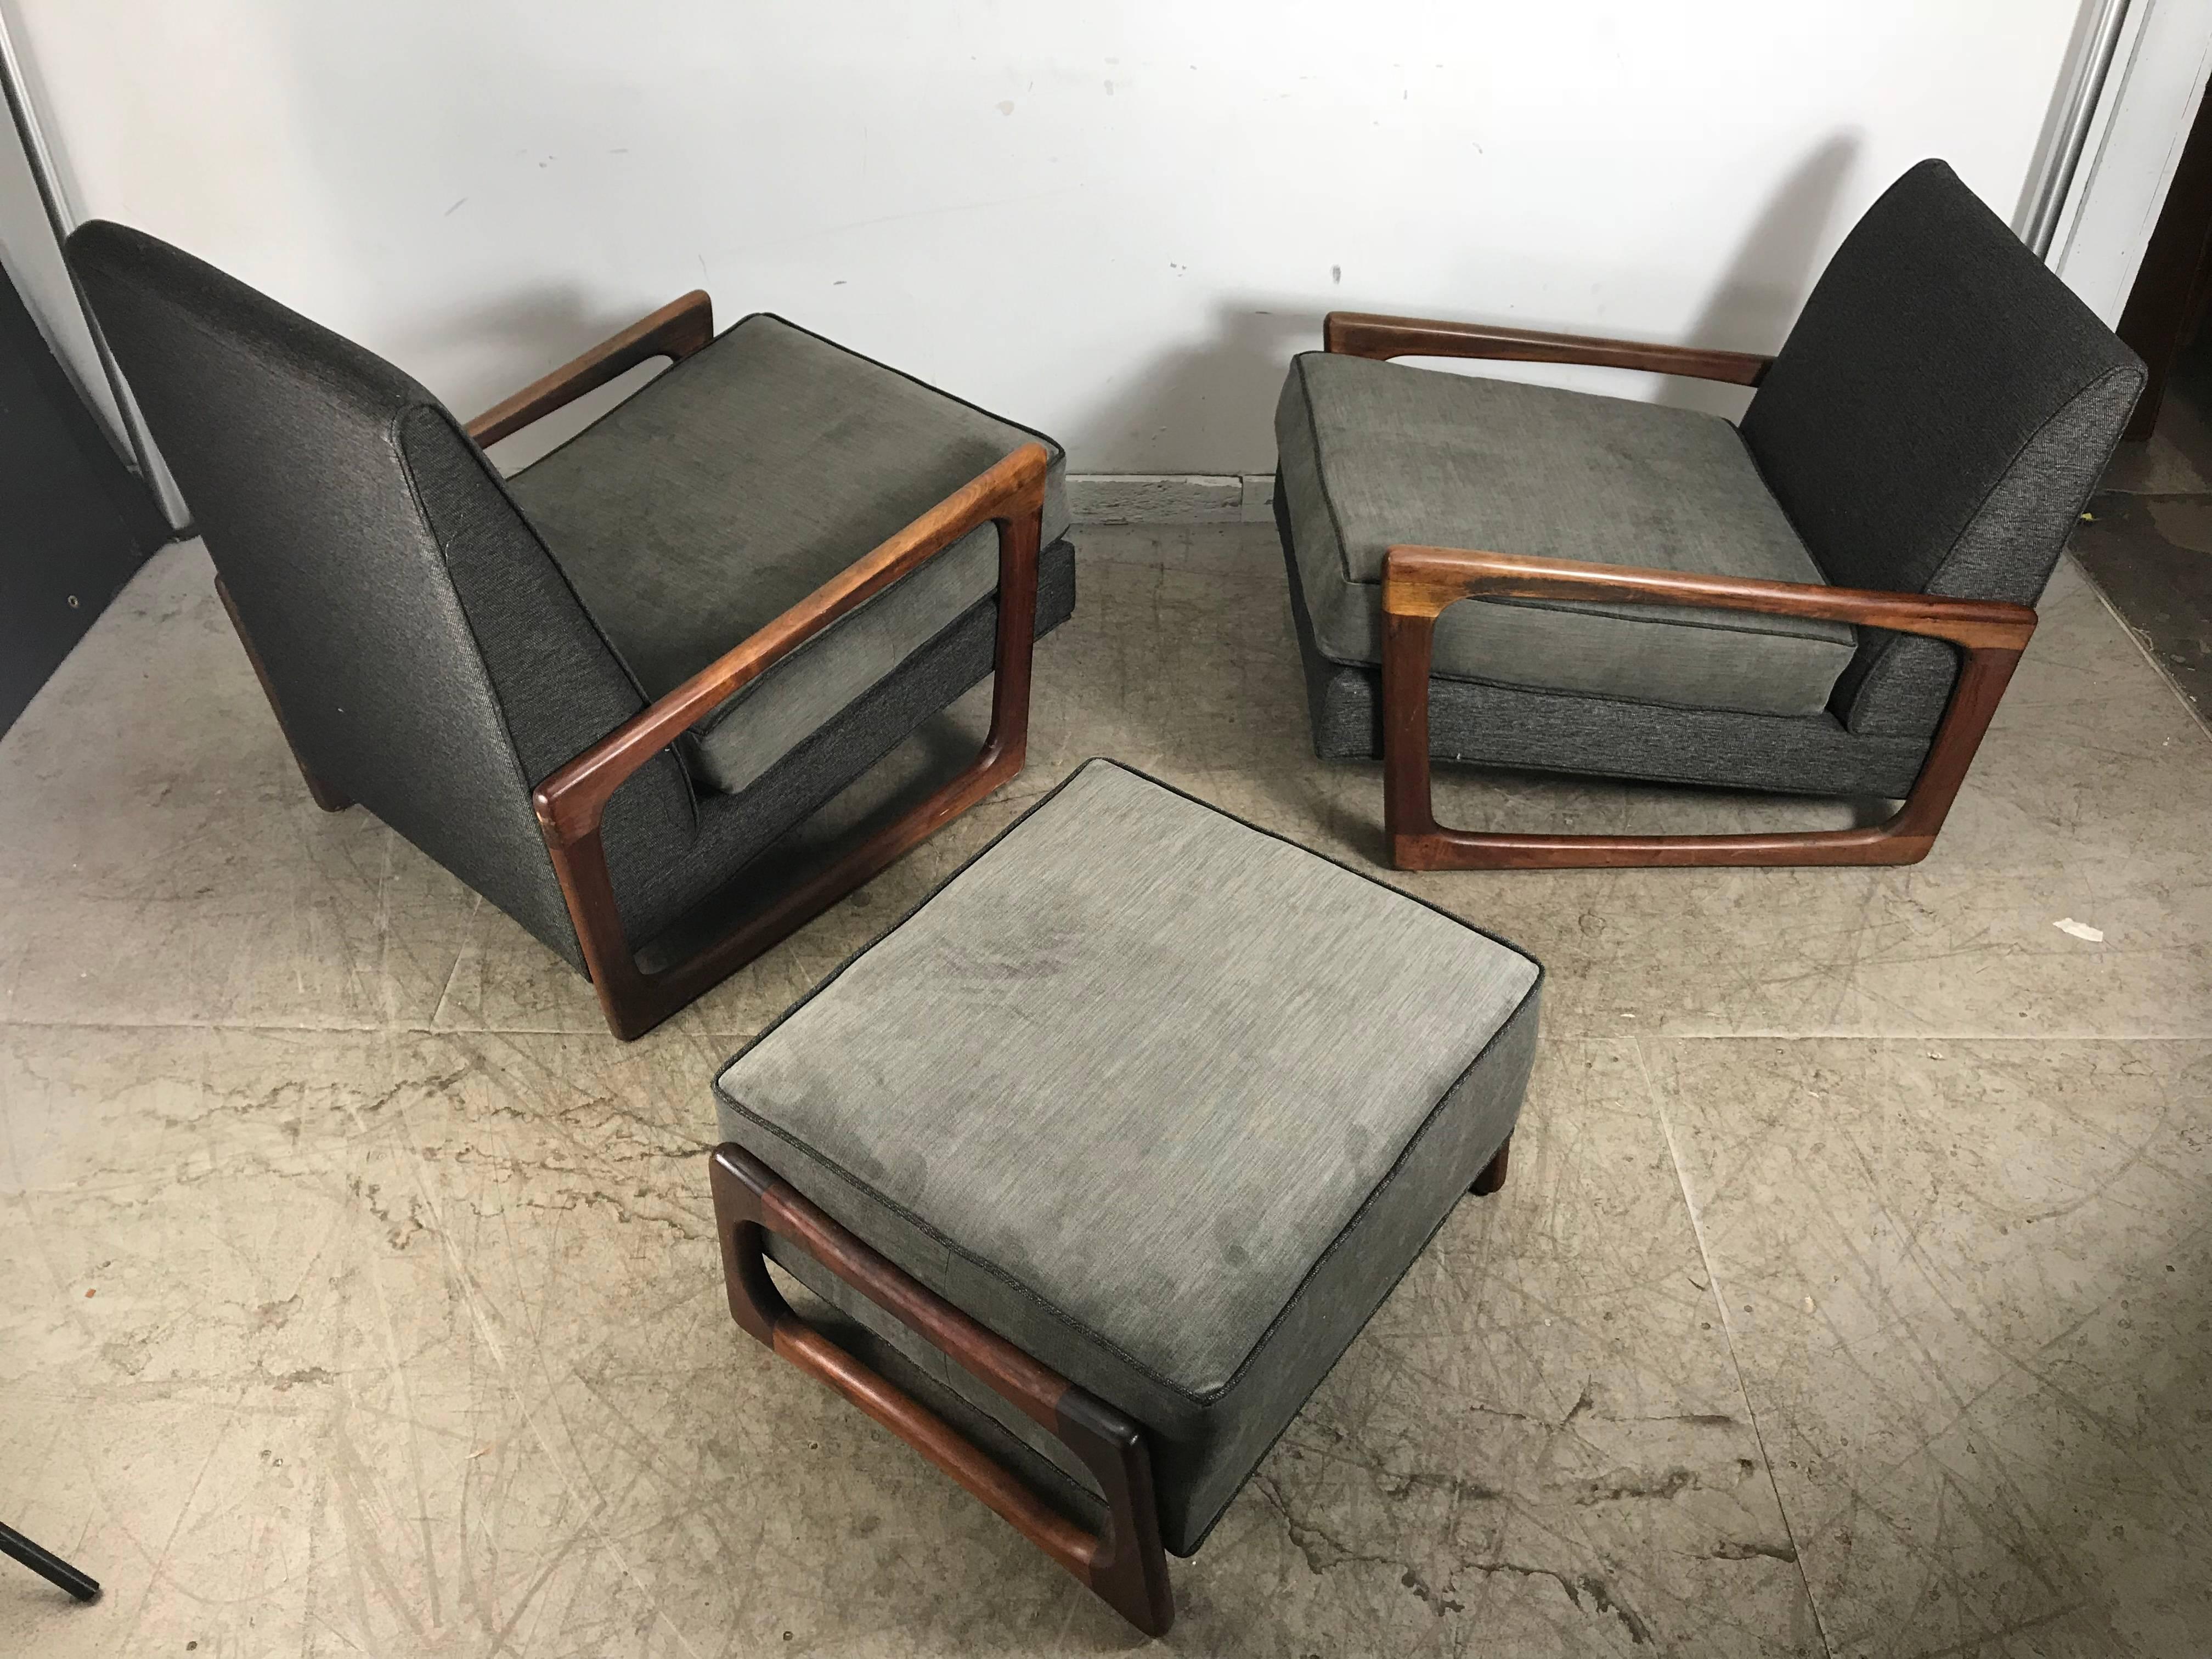 Oiled Stunning Classic Modernist Sculptural Lounge Chairs and Ottoman Adrian Pearsall